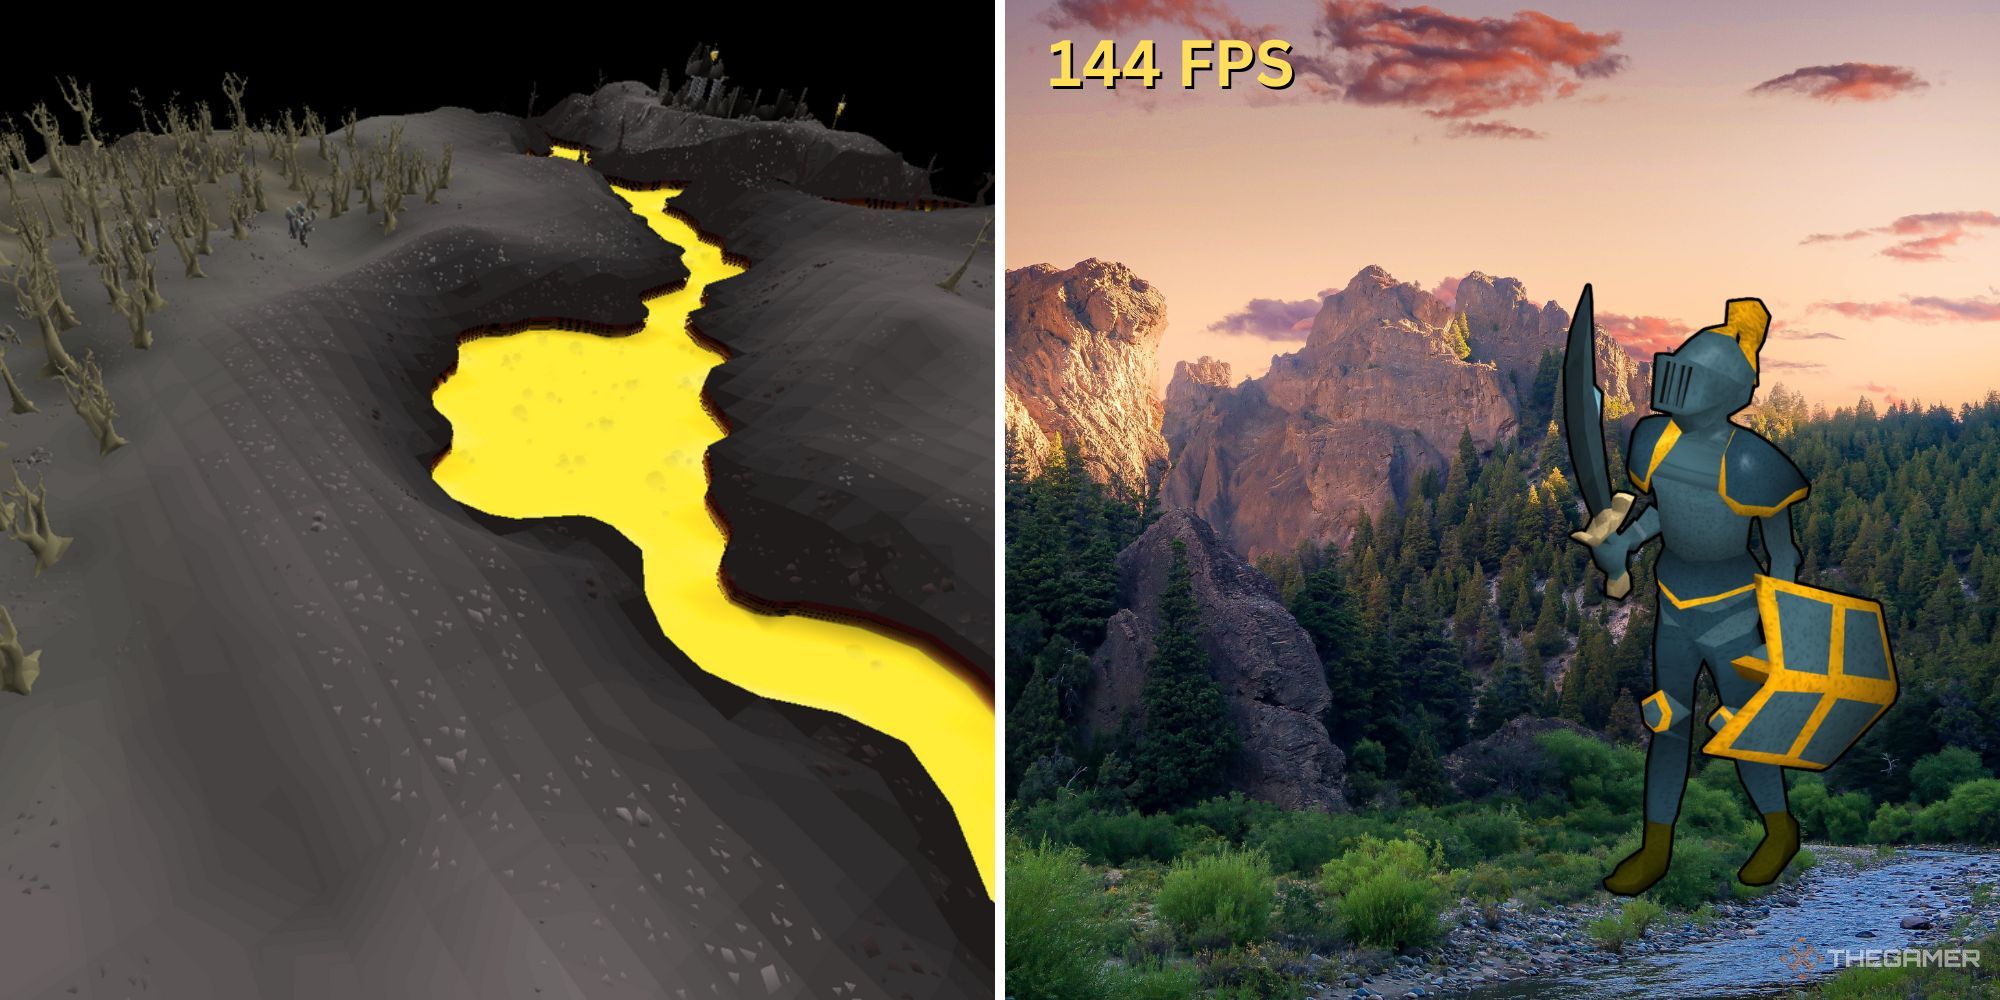 A split image of a lava river in the wilderness and a character in trimmed Rune armor in real-life wilderness.